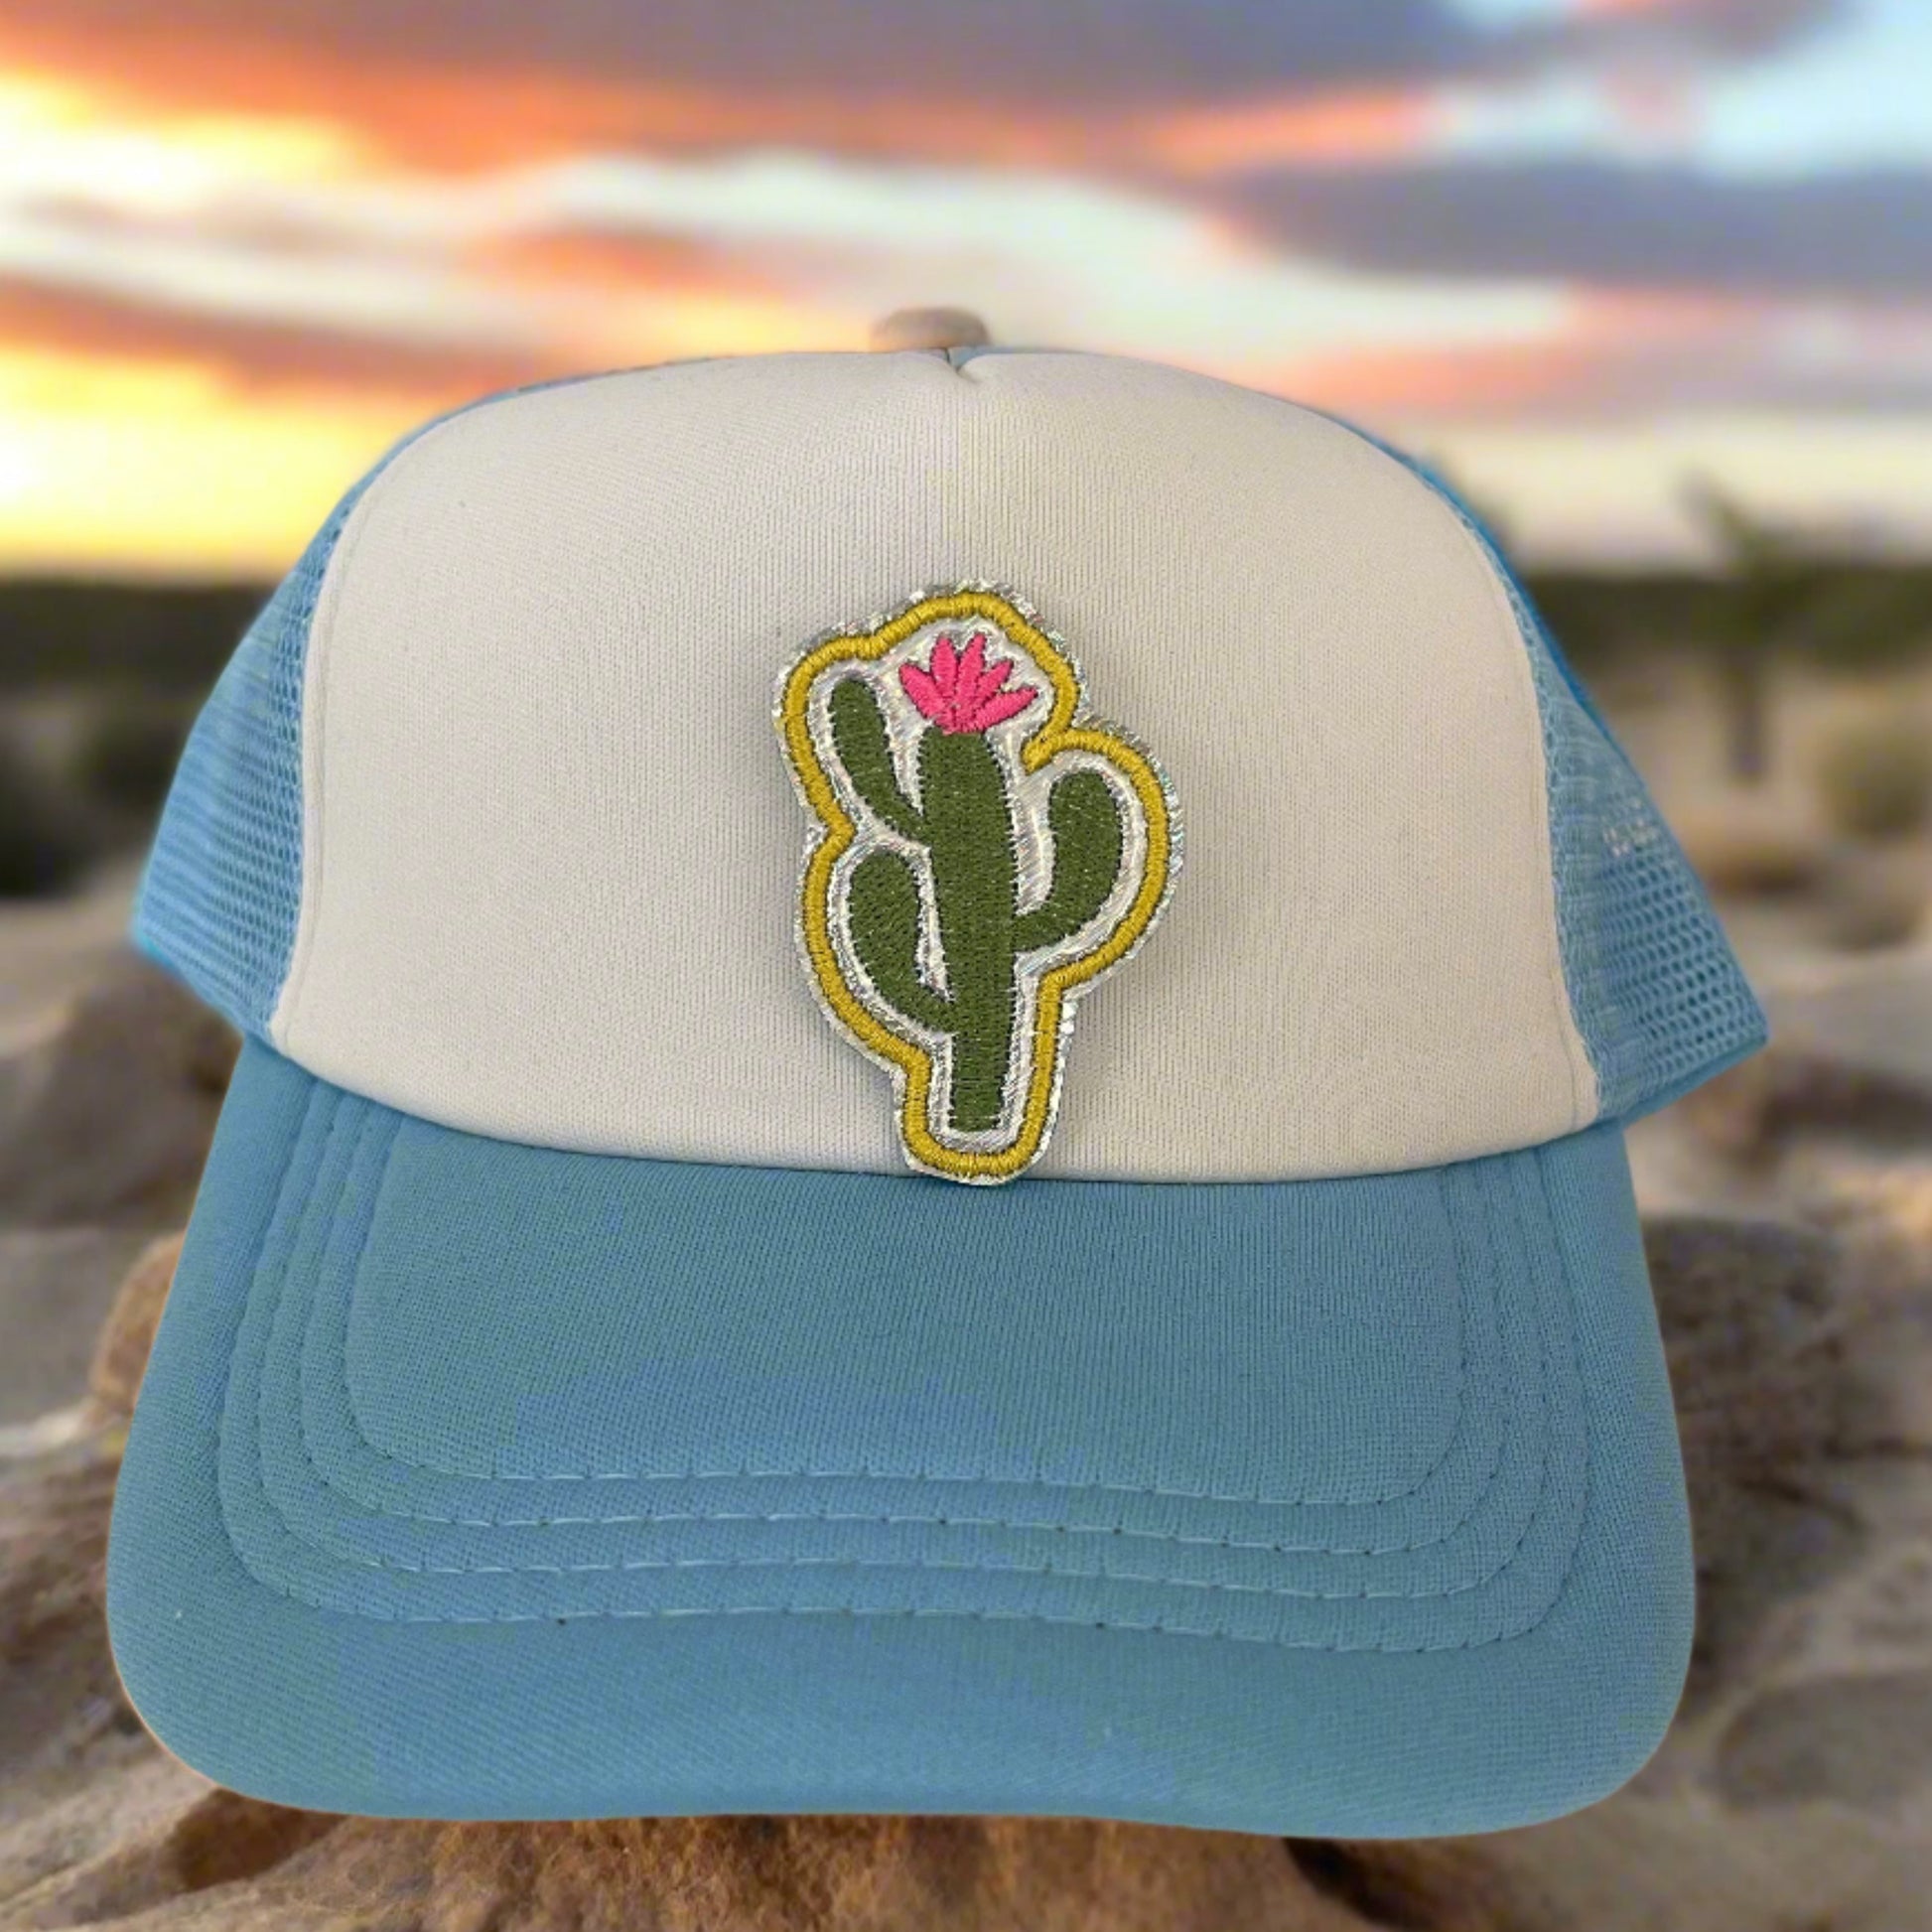 Close-up of a Trendy Cactus embroidered patch featuring a green cactus with a pink flower, perfect for customizing hats, apparel, and various accessories.